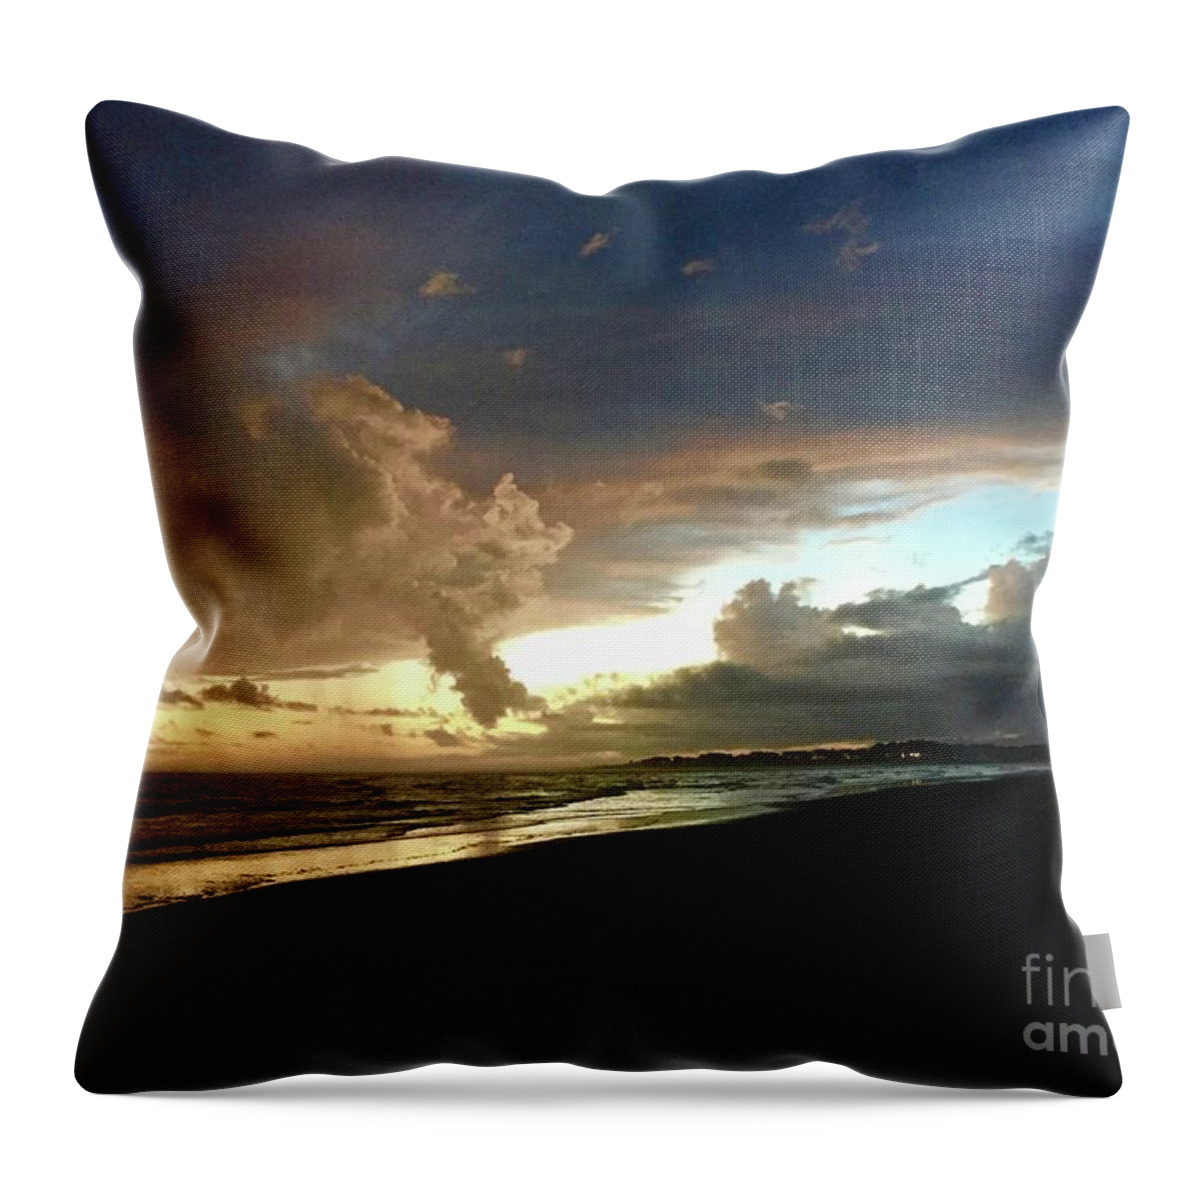 Evening Throw Pillow featuring the photograph Evening Sky by Flavia Westerwelle